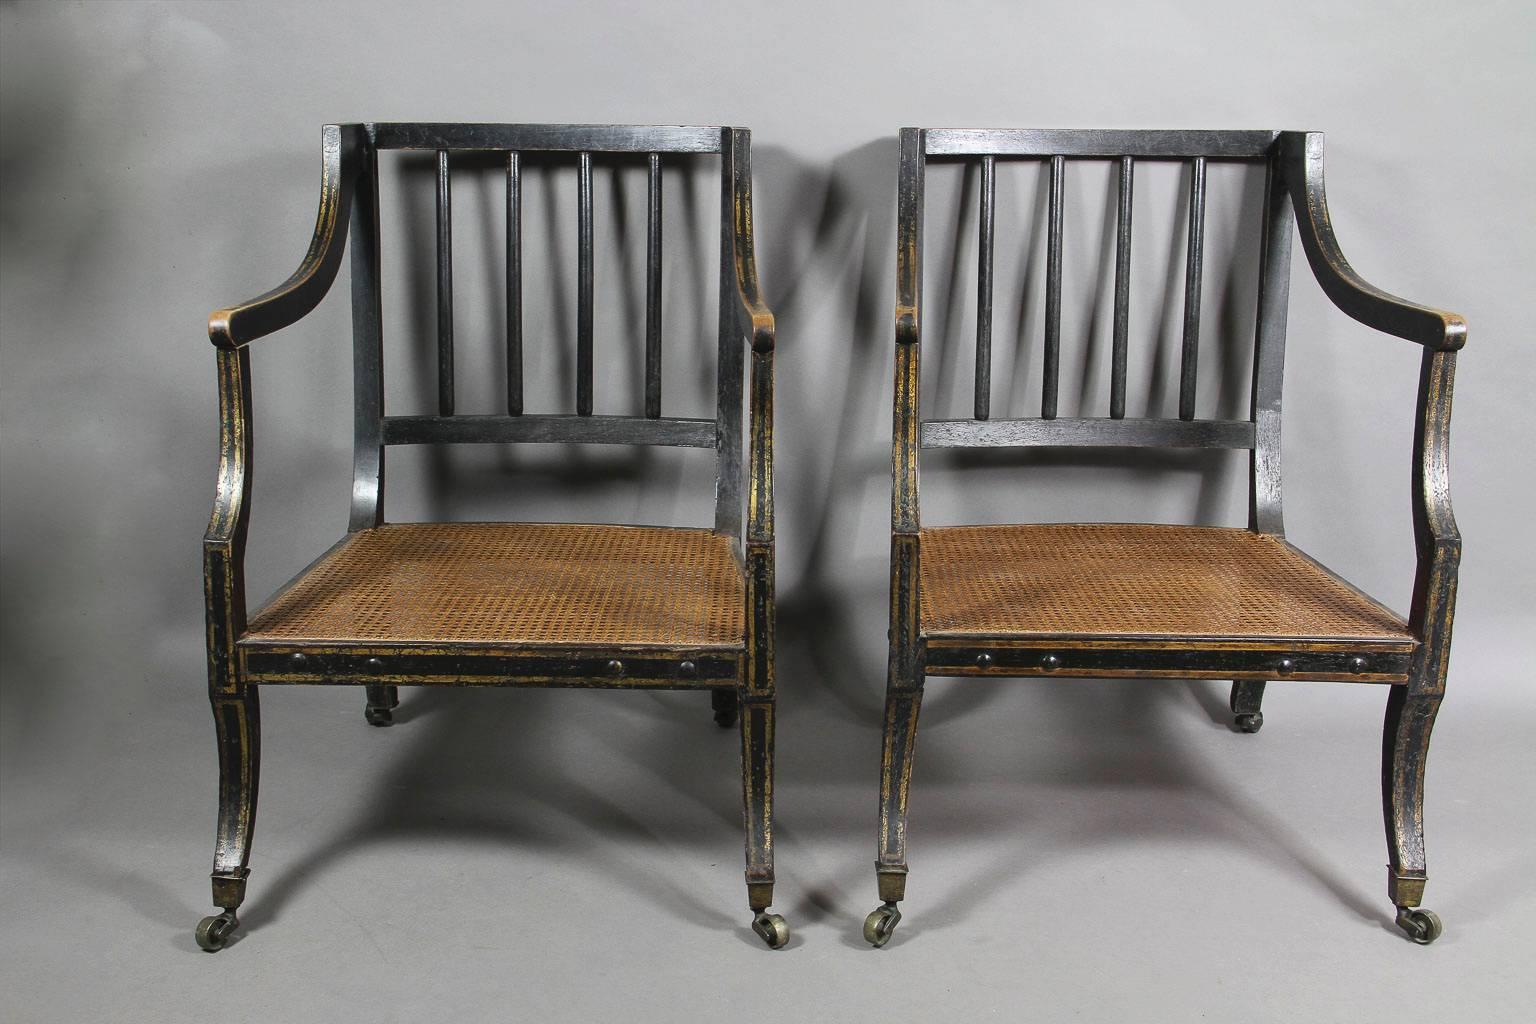 Pair of Regency Ebonized and Gilded Caned Armchairs 1